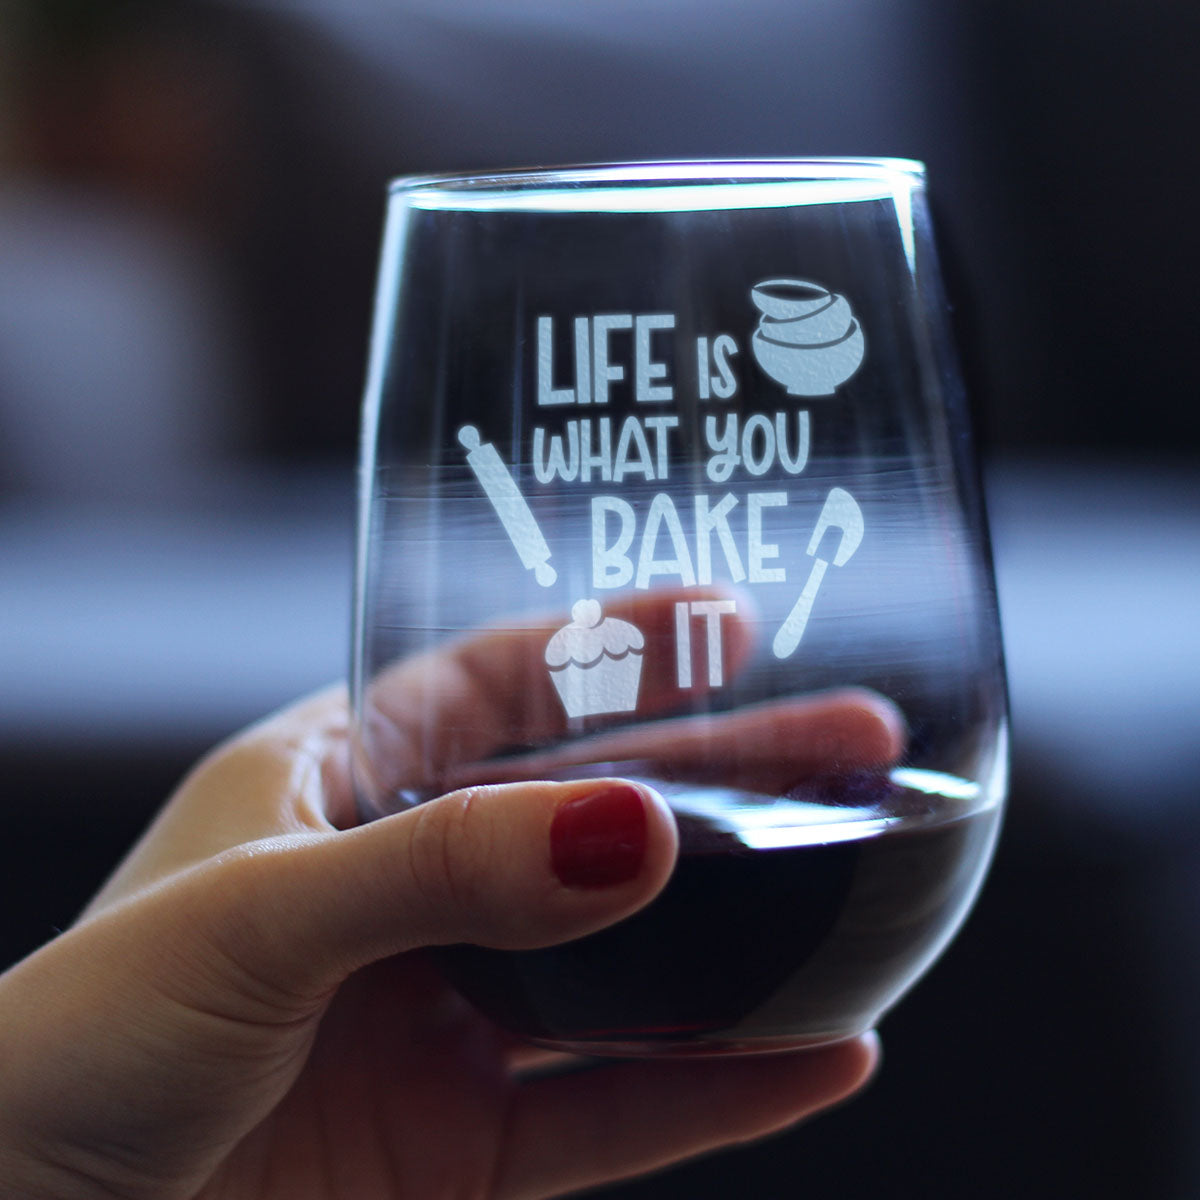 Life Is What You Bake It - Stemless Wine Glass - Funny Baking Themed Decor and Gifts for Bakers - Large 17 Oz Glasses